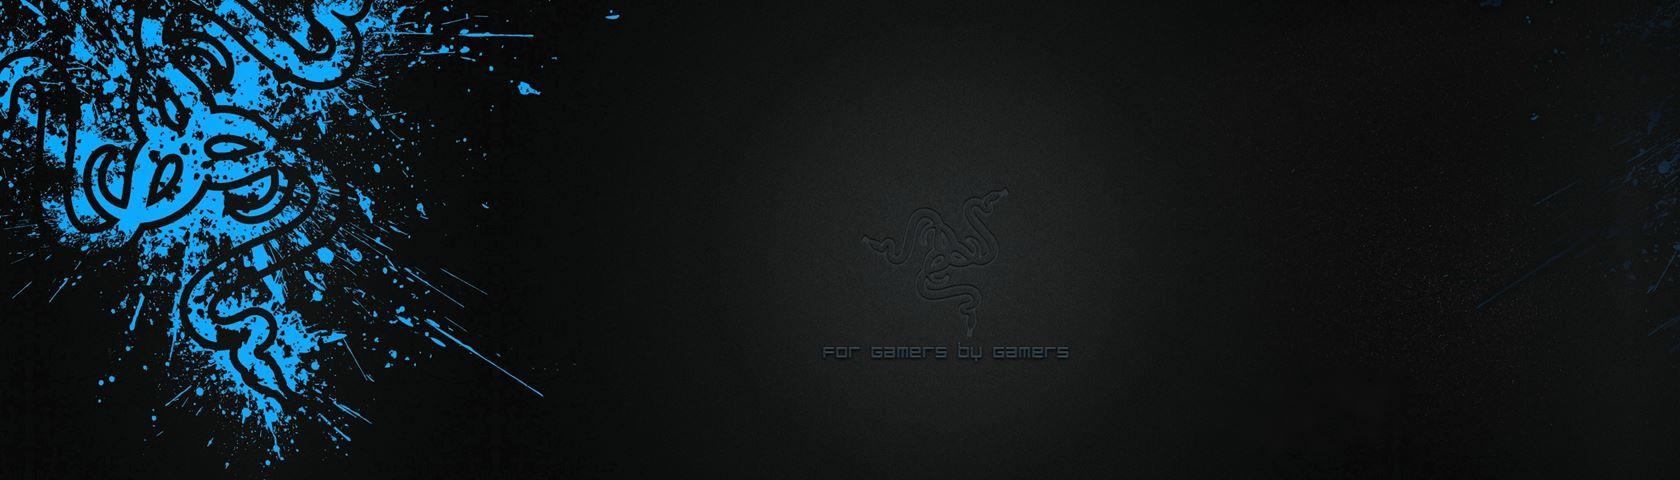 RAZER • Image • WallpaperFusion by Binary Fortress Software